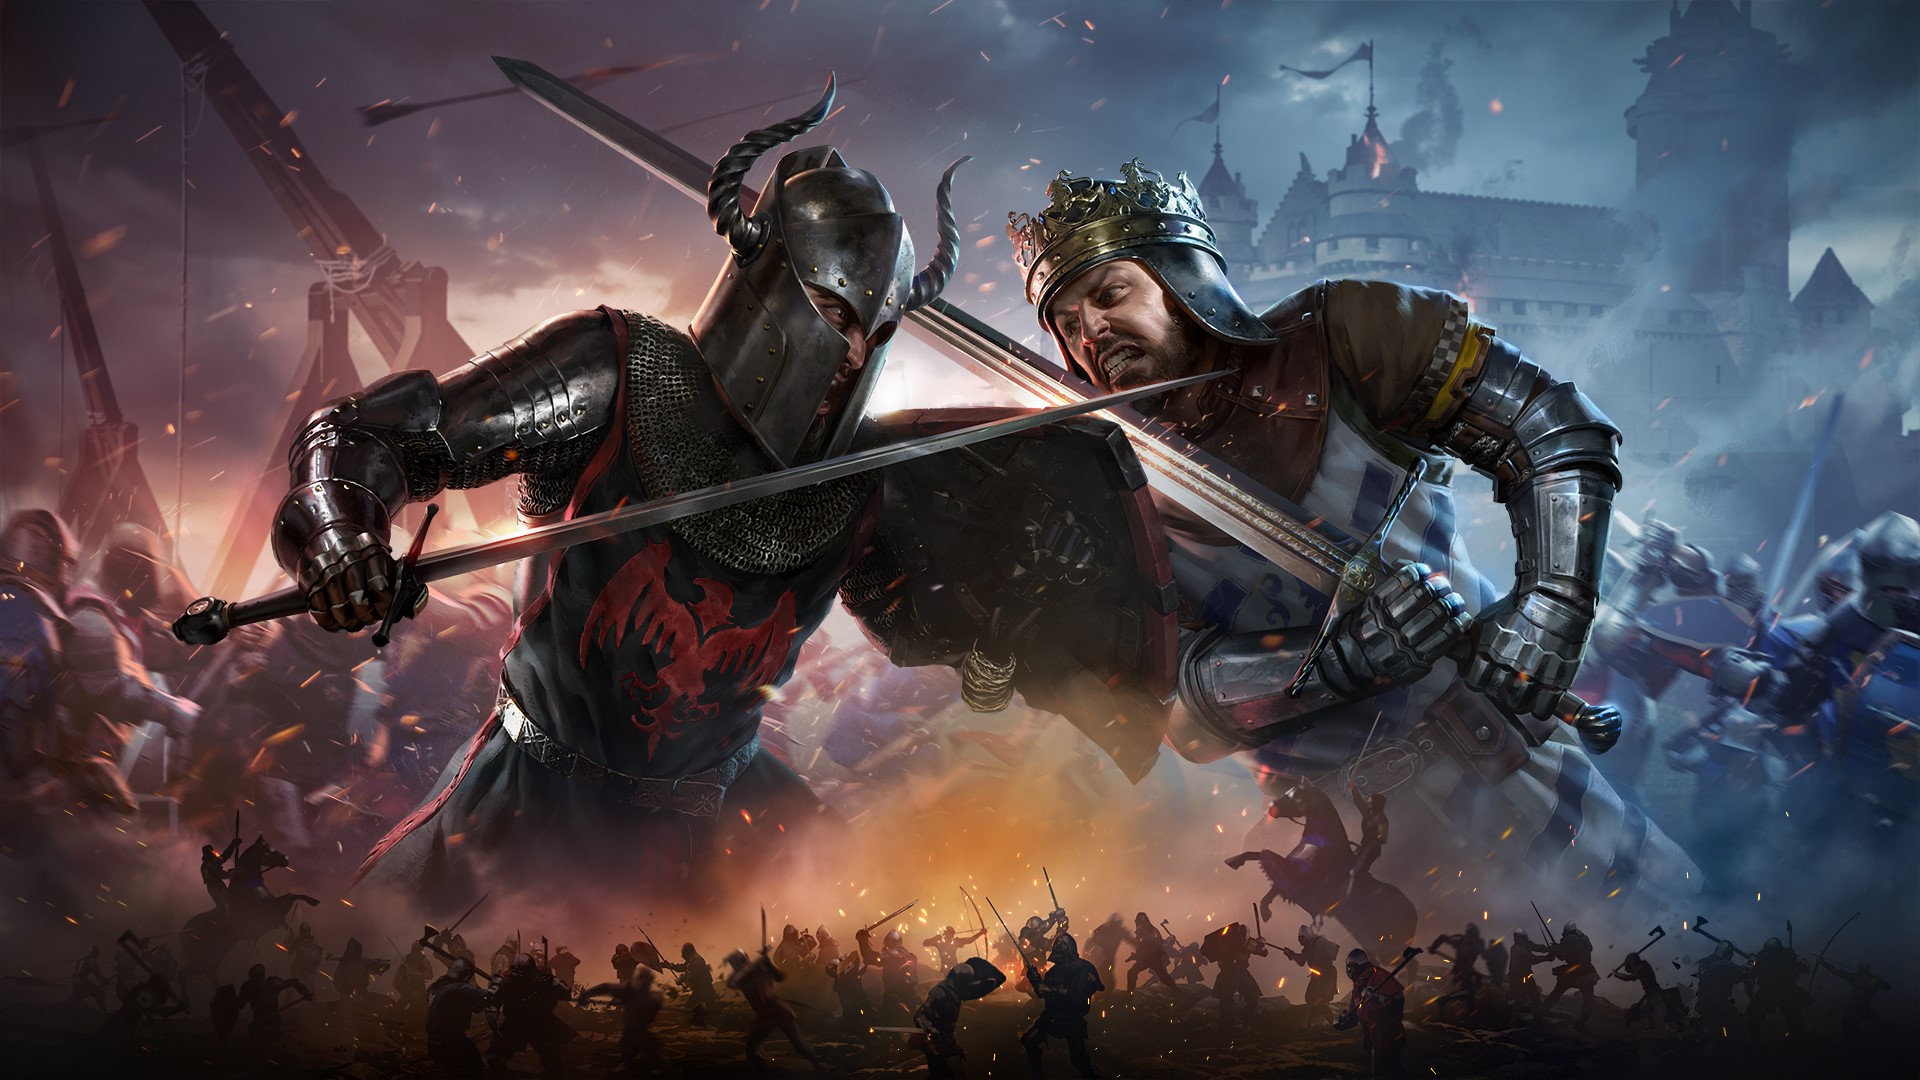 Chivalry 2 picks up extra 500,000 Xbox players thanks to Game Pass